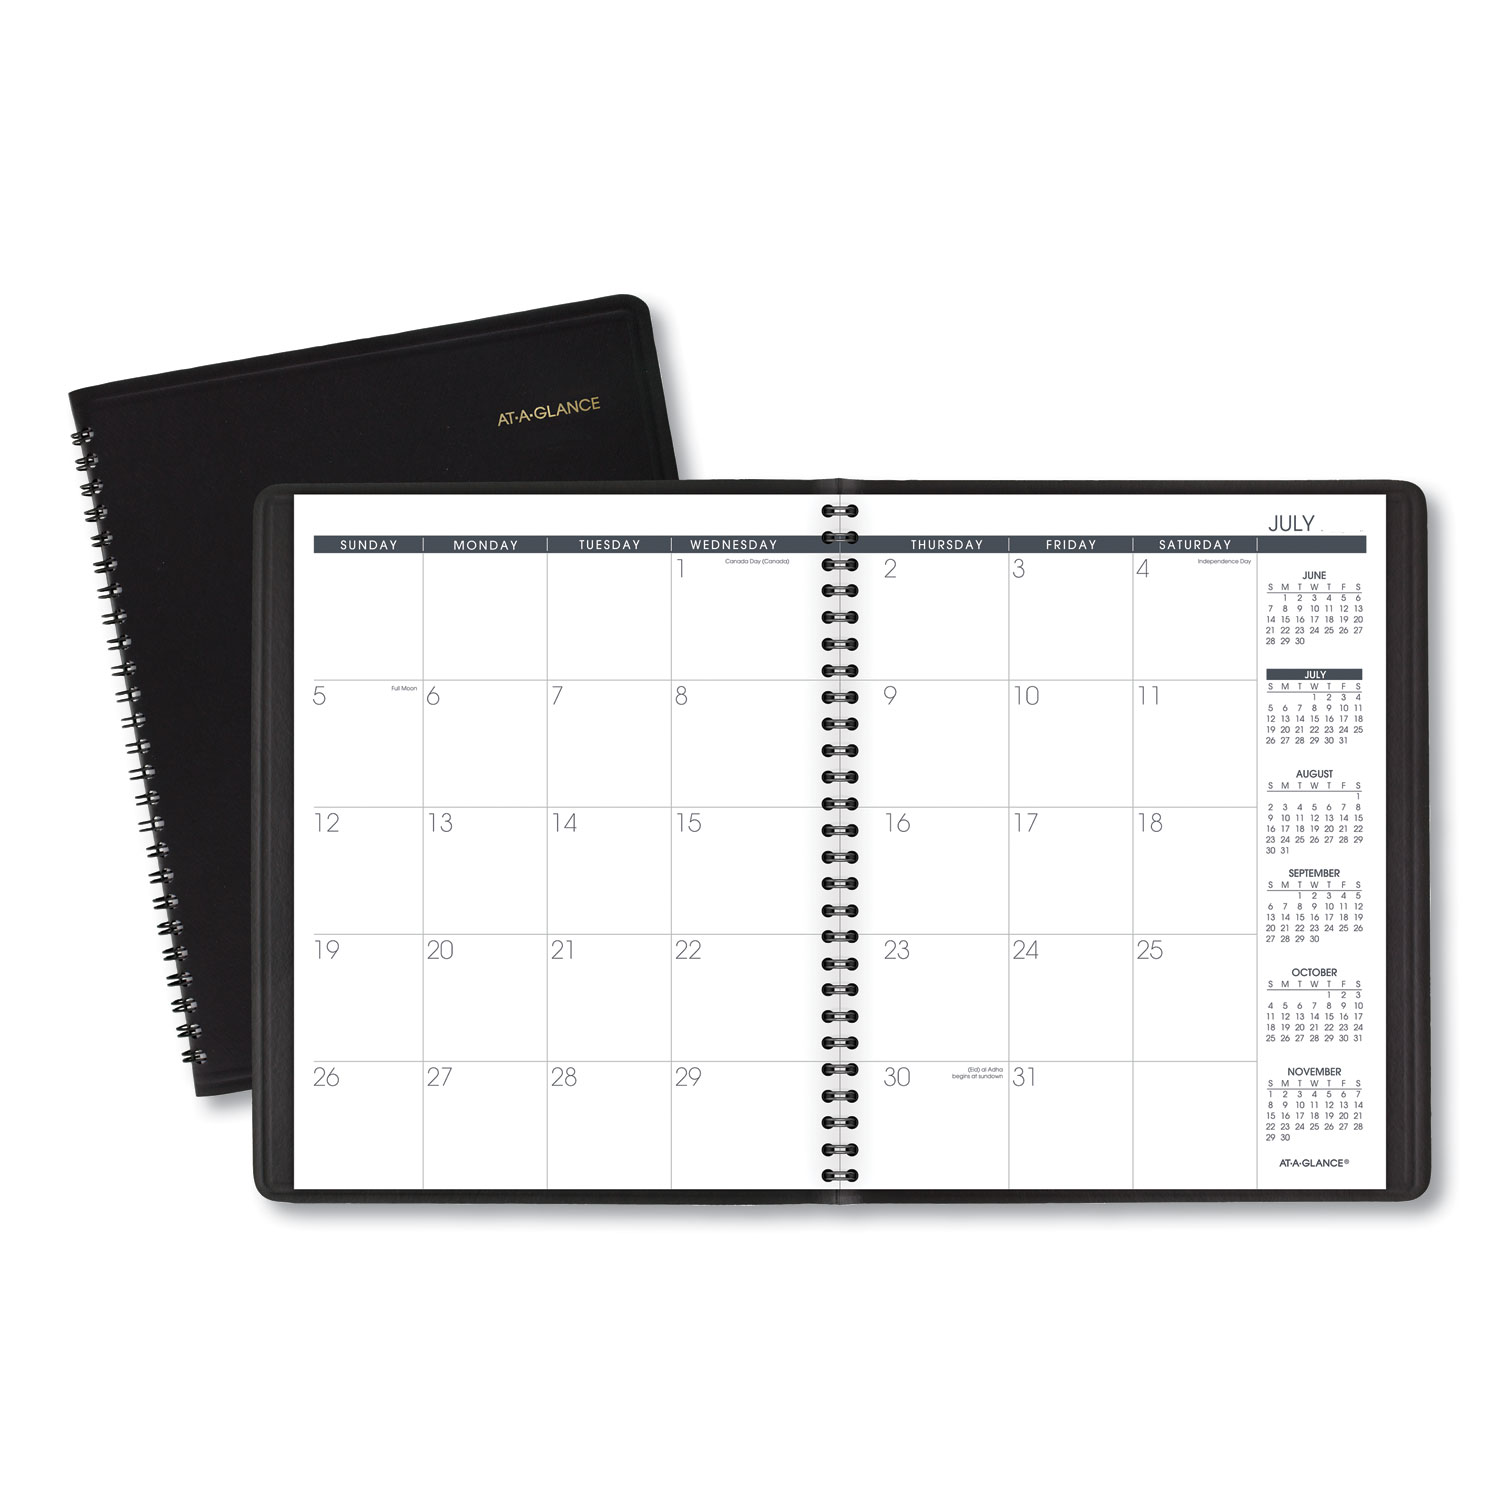  AT-A-GLANCE 7012705 Monthly Planner,8.75 x 7, Black, 2020-2021 (AAG7012705) 